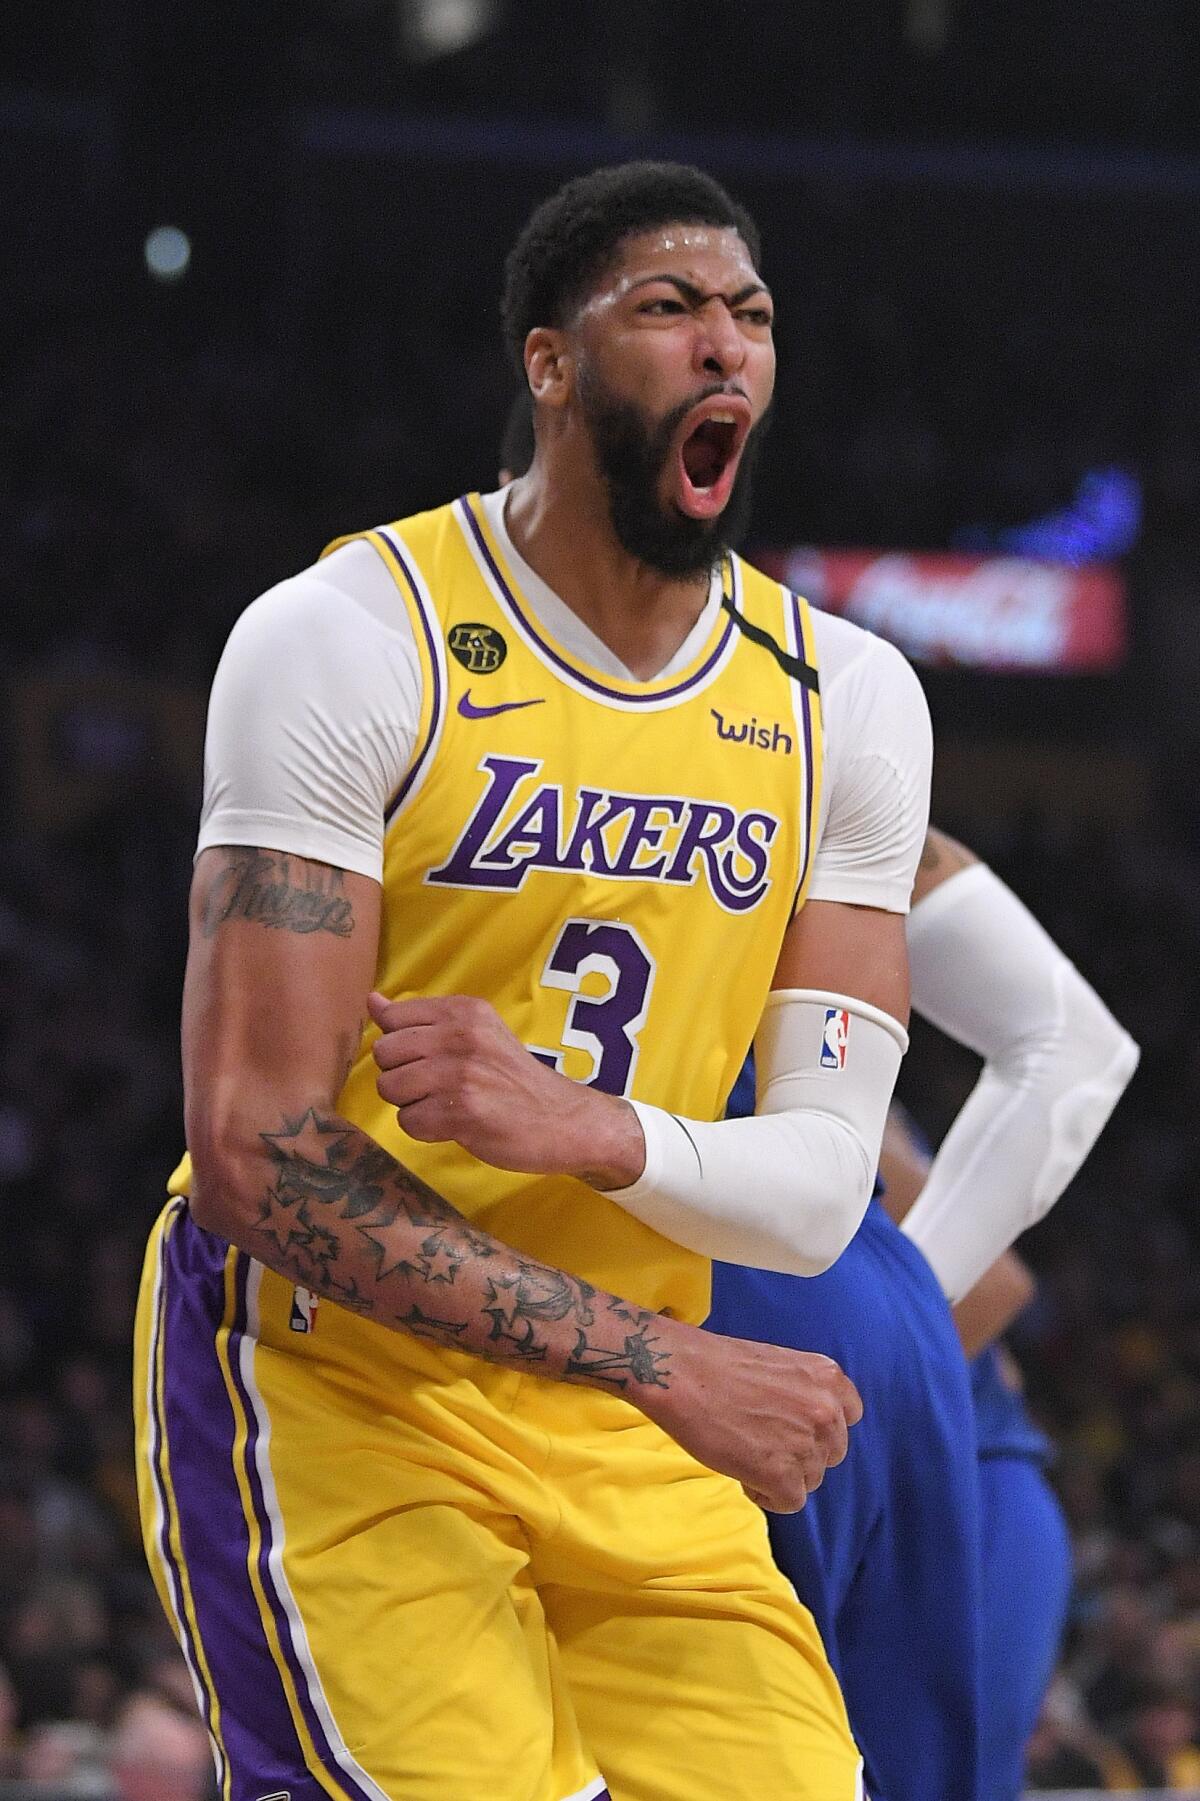 2020 lakers jersey